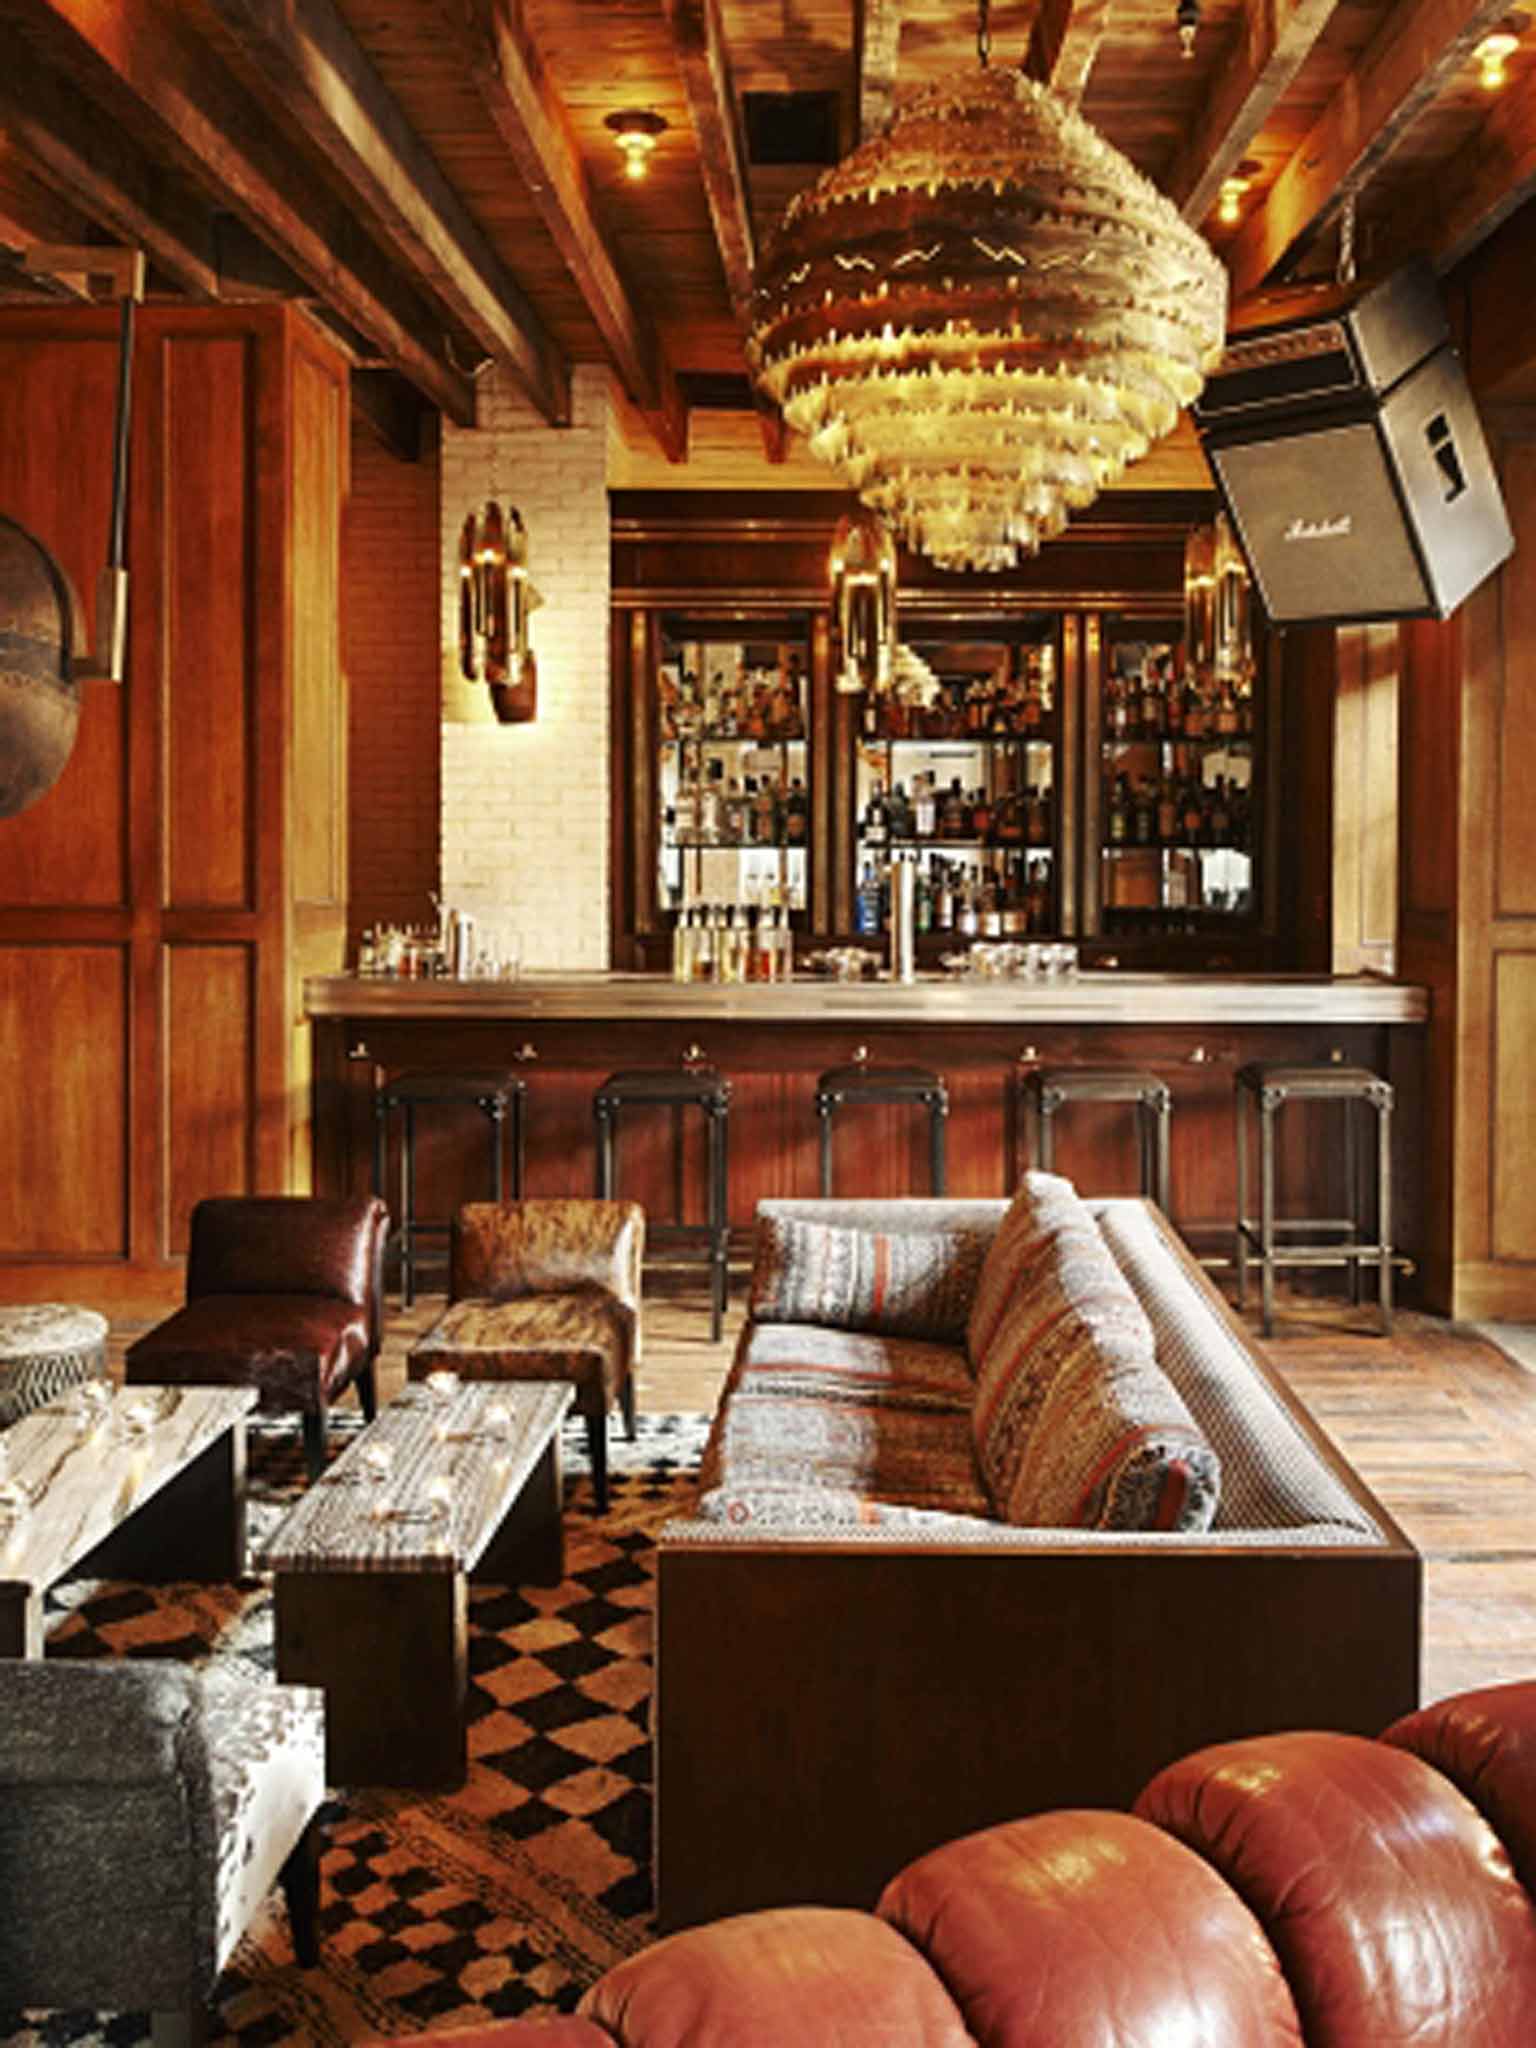 The hotel's own bar provides an experience in Thirties glamour